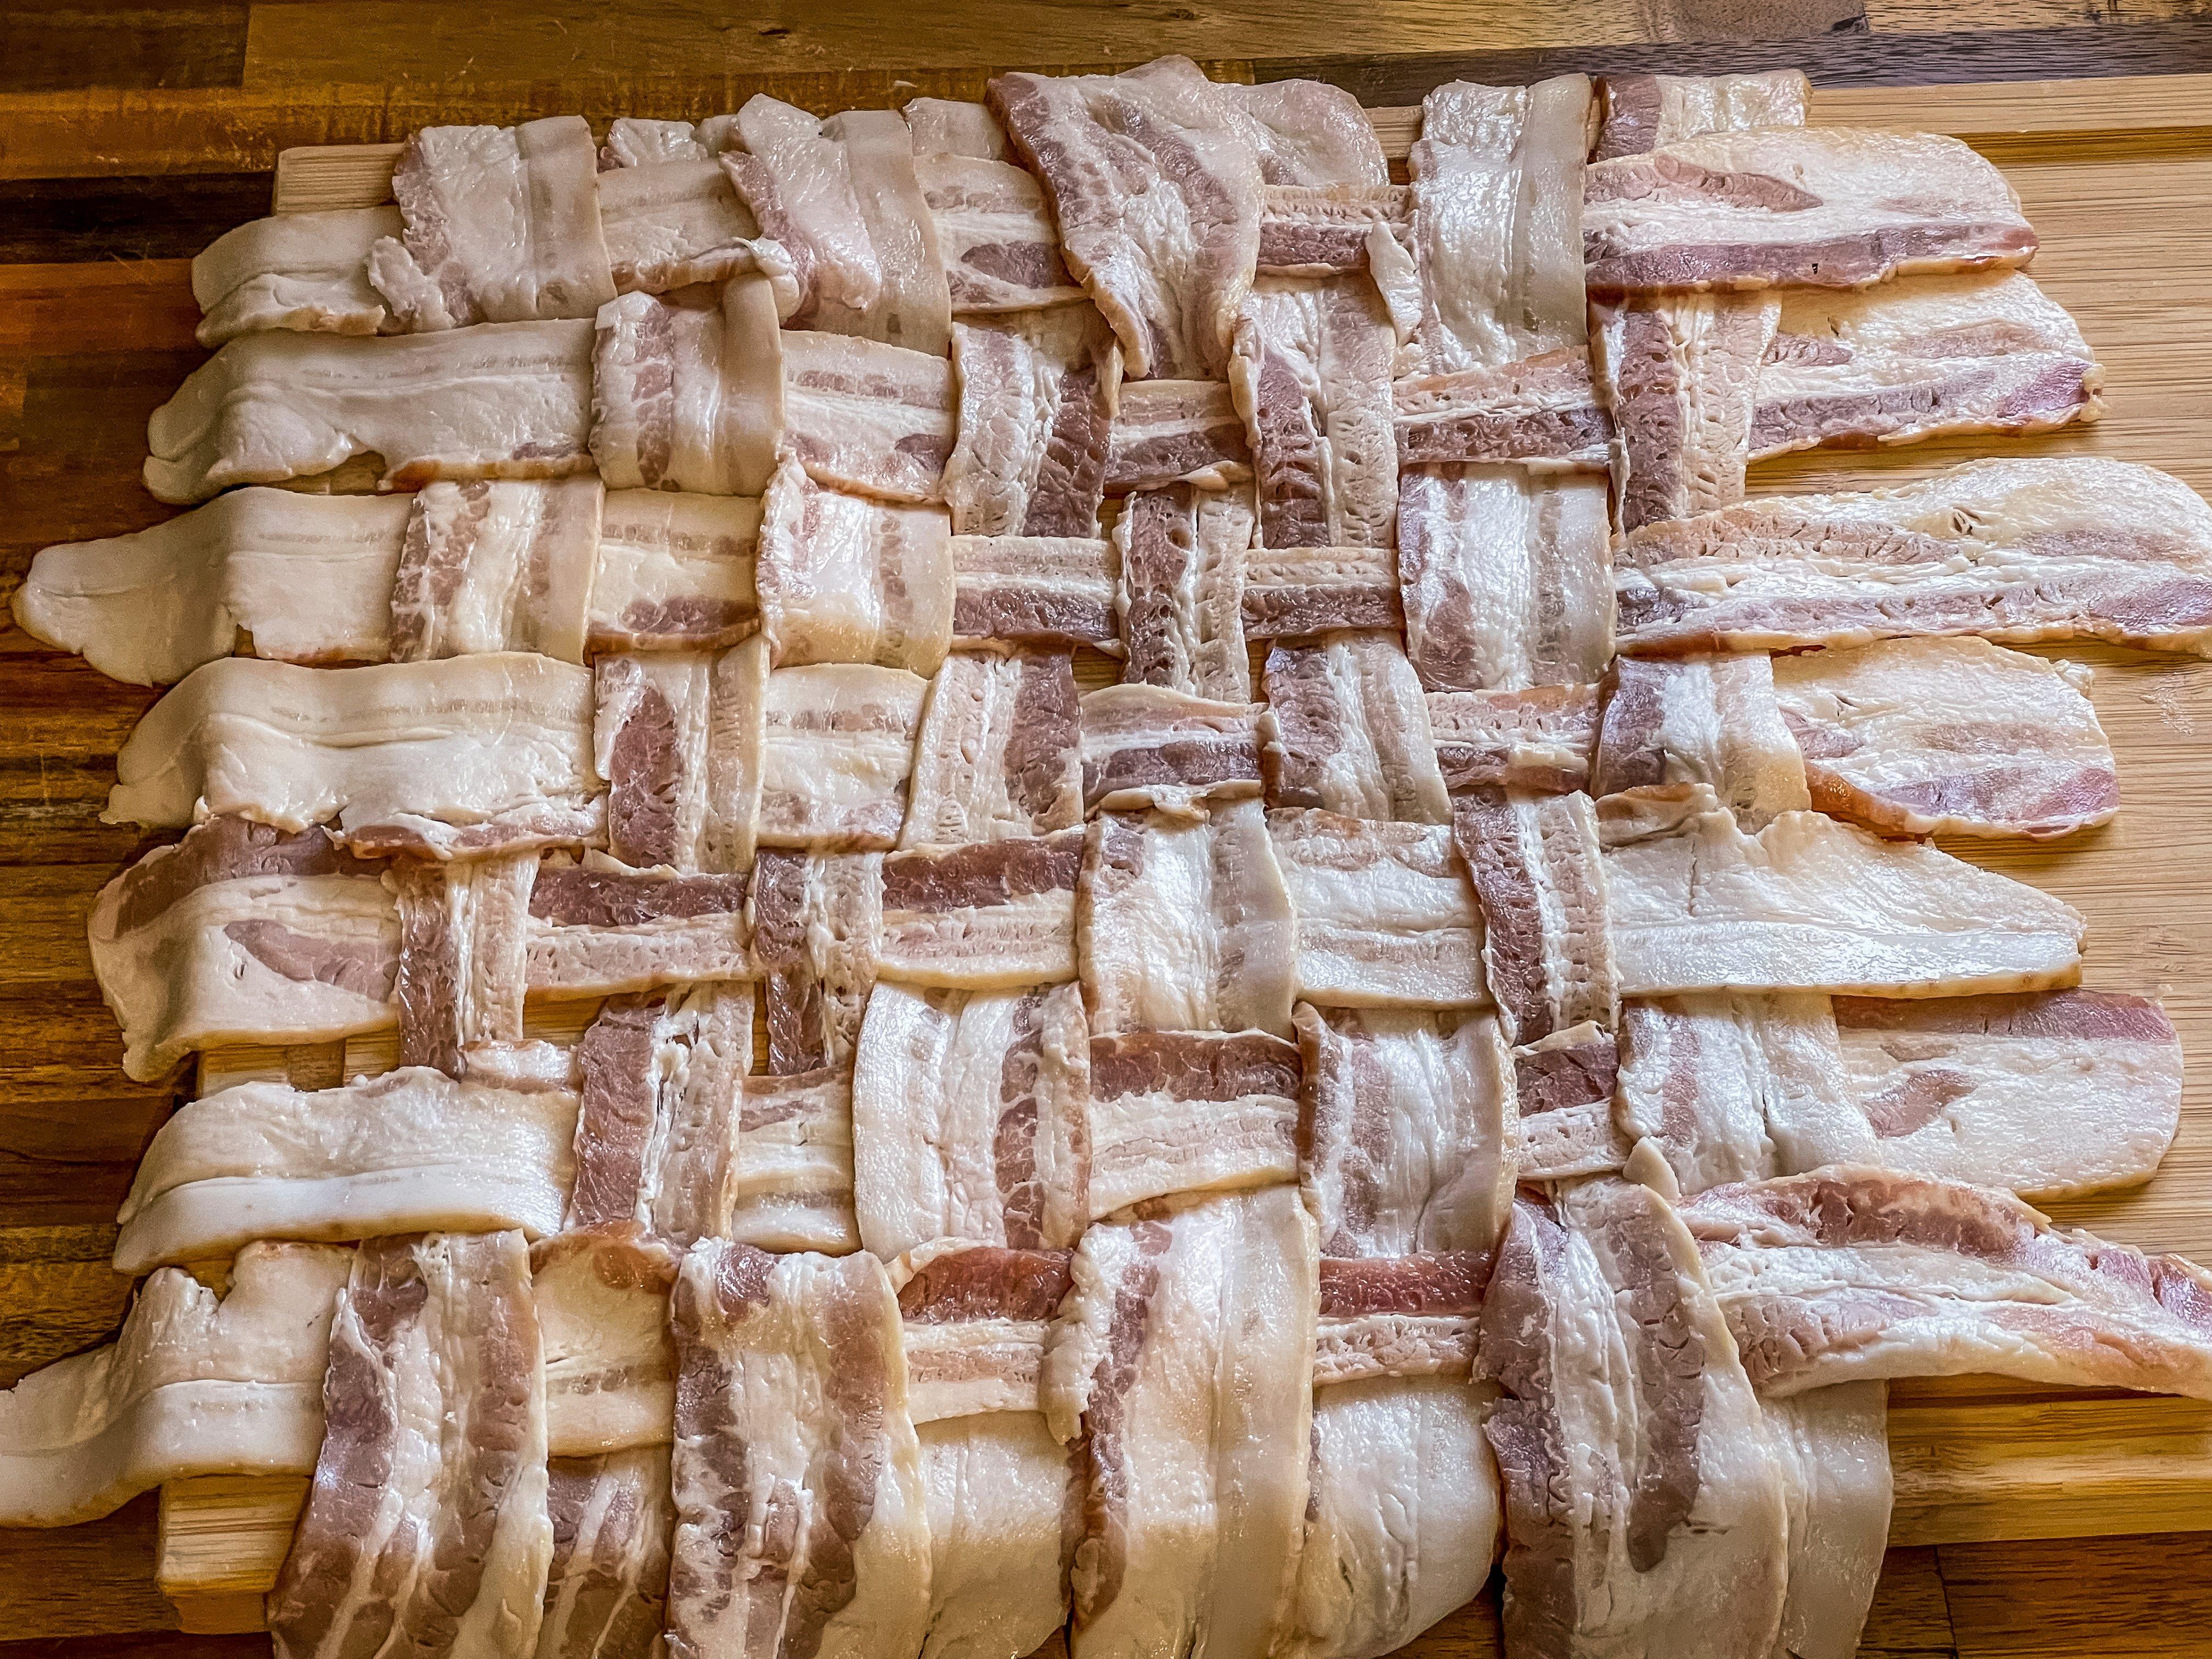 It's hard to go wrong with a recipe that starts with a bacon weave.